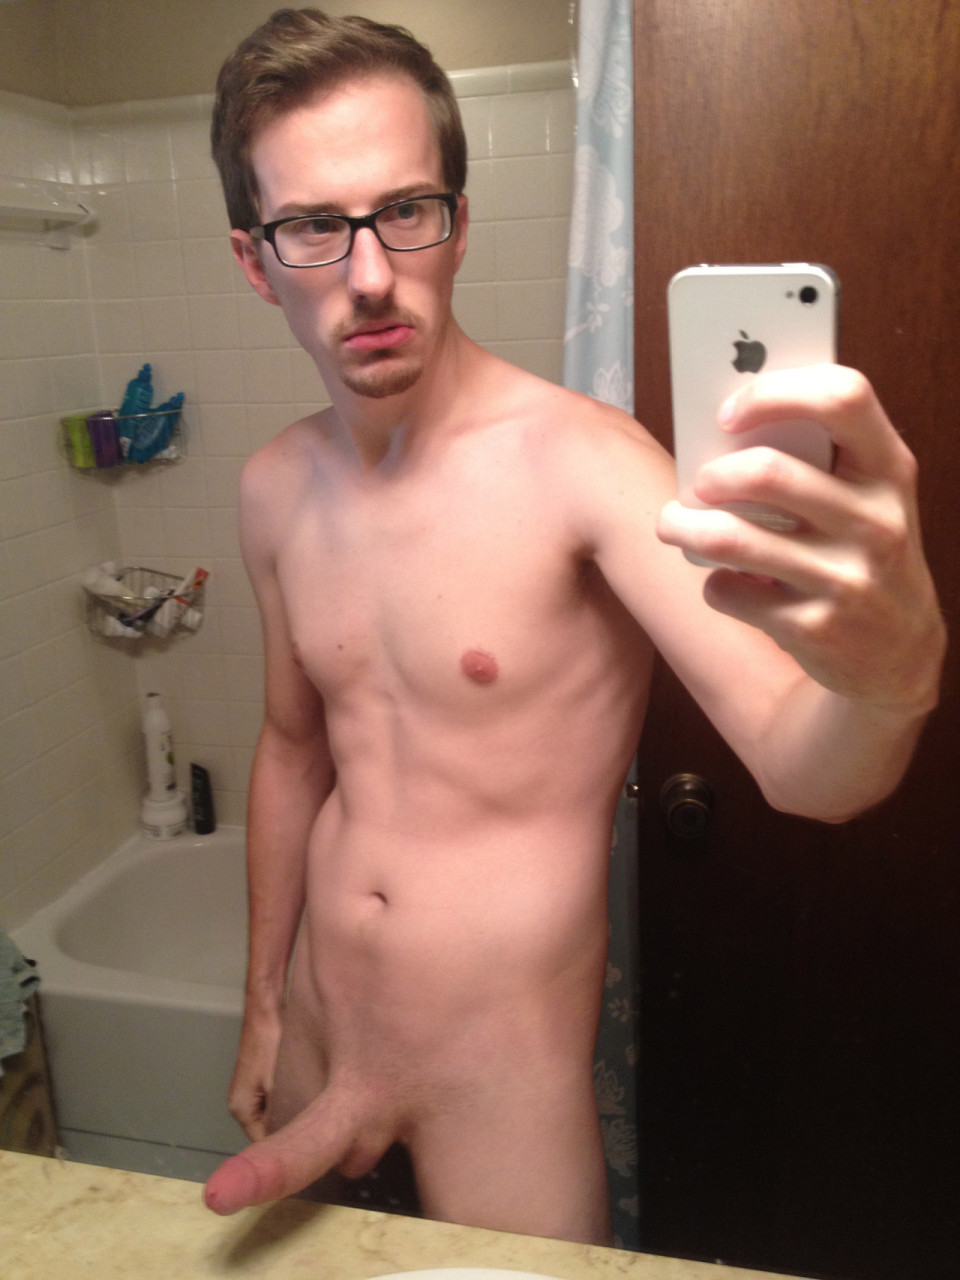 Men With Glasses Porn - Nude nerdy guys with glasses - Other - Porn Pics